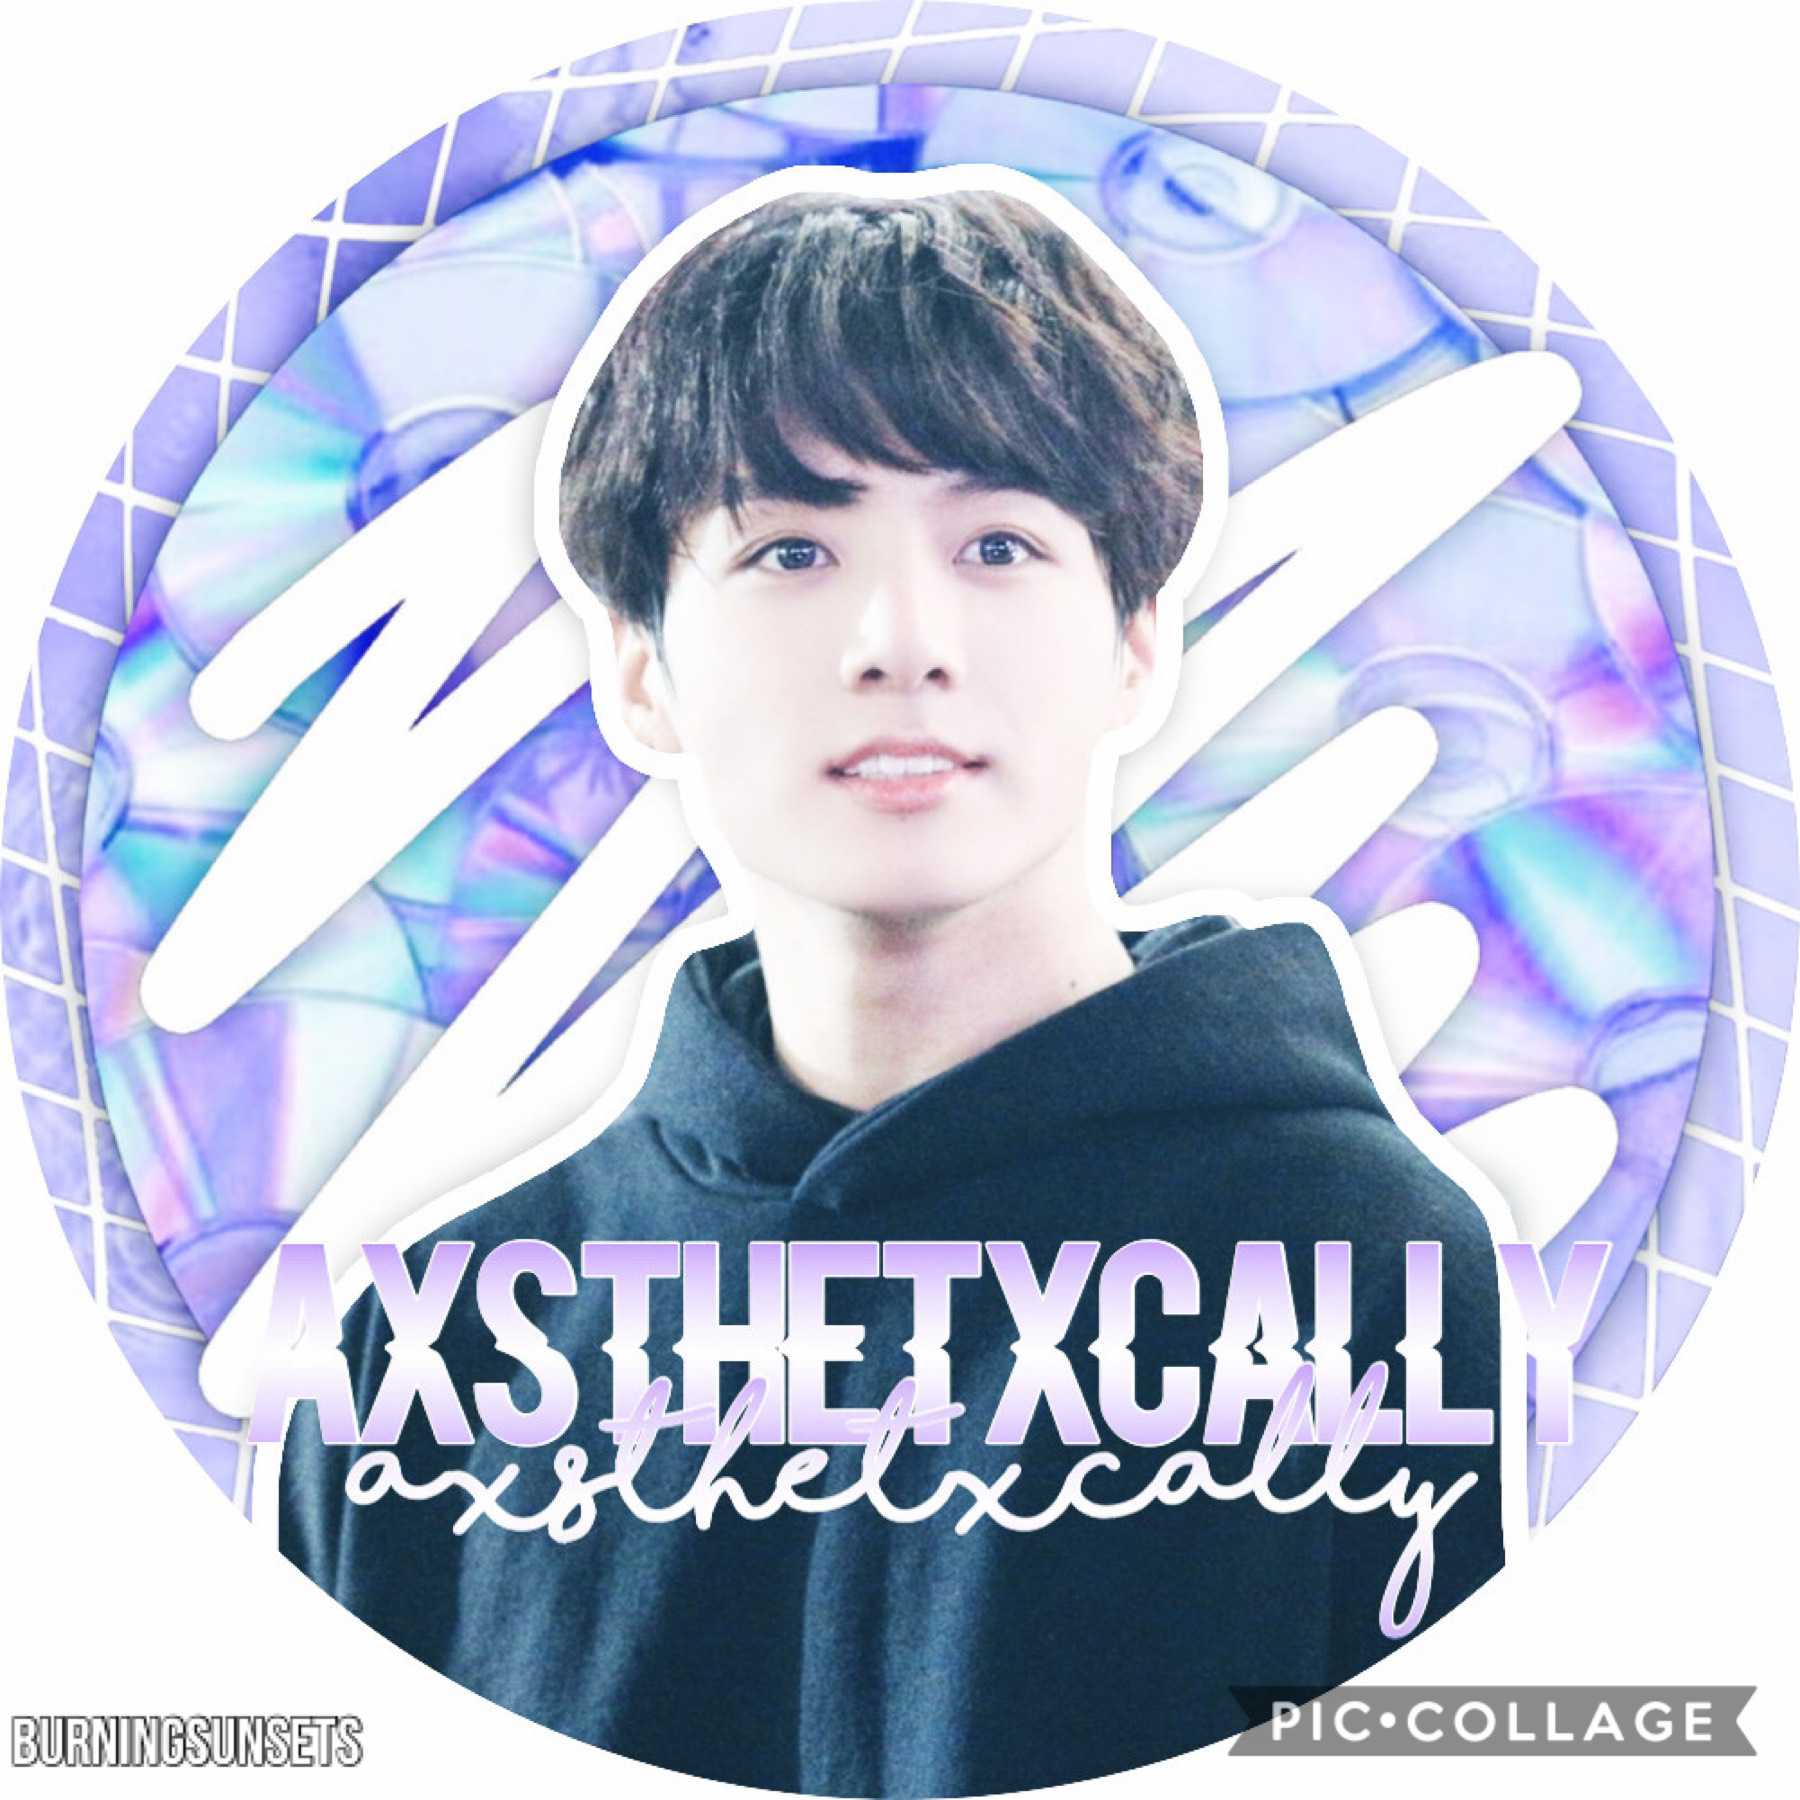 『 𝐎𝐩𝐞𝐧 𝐌𝐞 』
hi guys ✧
this is a jungkook icon requested by @axsthetxcally
i hope you like it
✧psa ✧
I make all of my icons myself. I don’t use any templates or anything like that.✧ I cut out the stickers myself and get the backdrop photos from pinterest.
